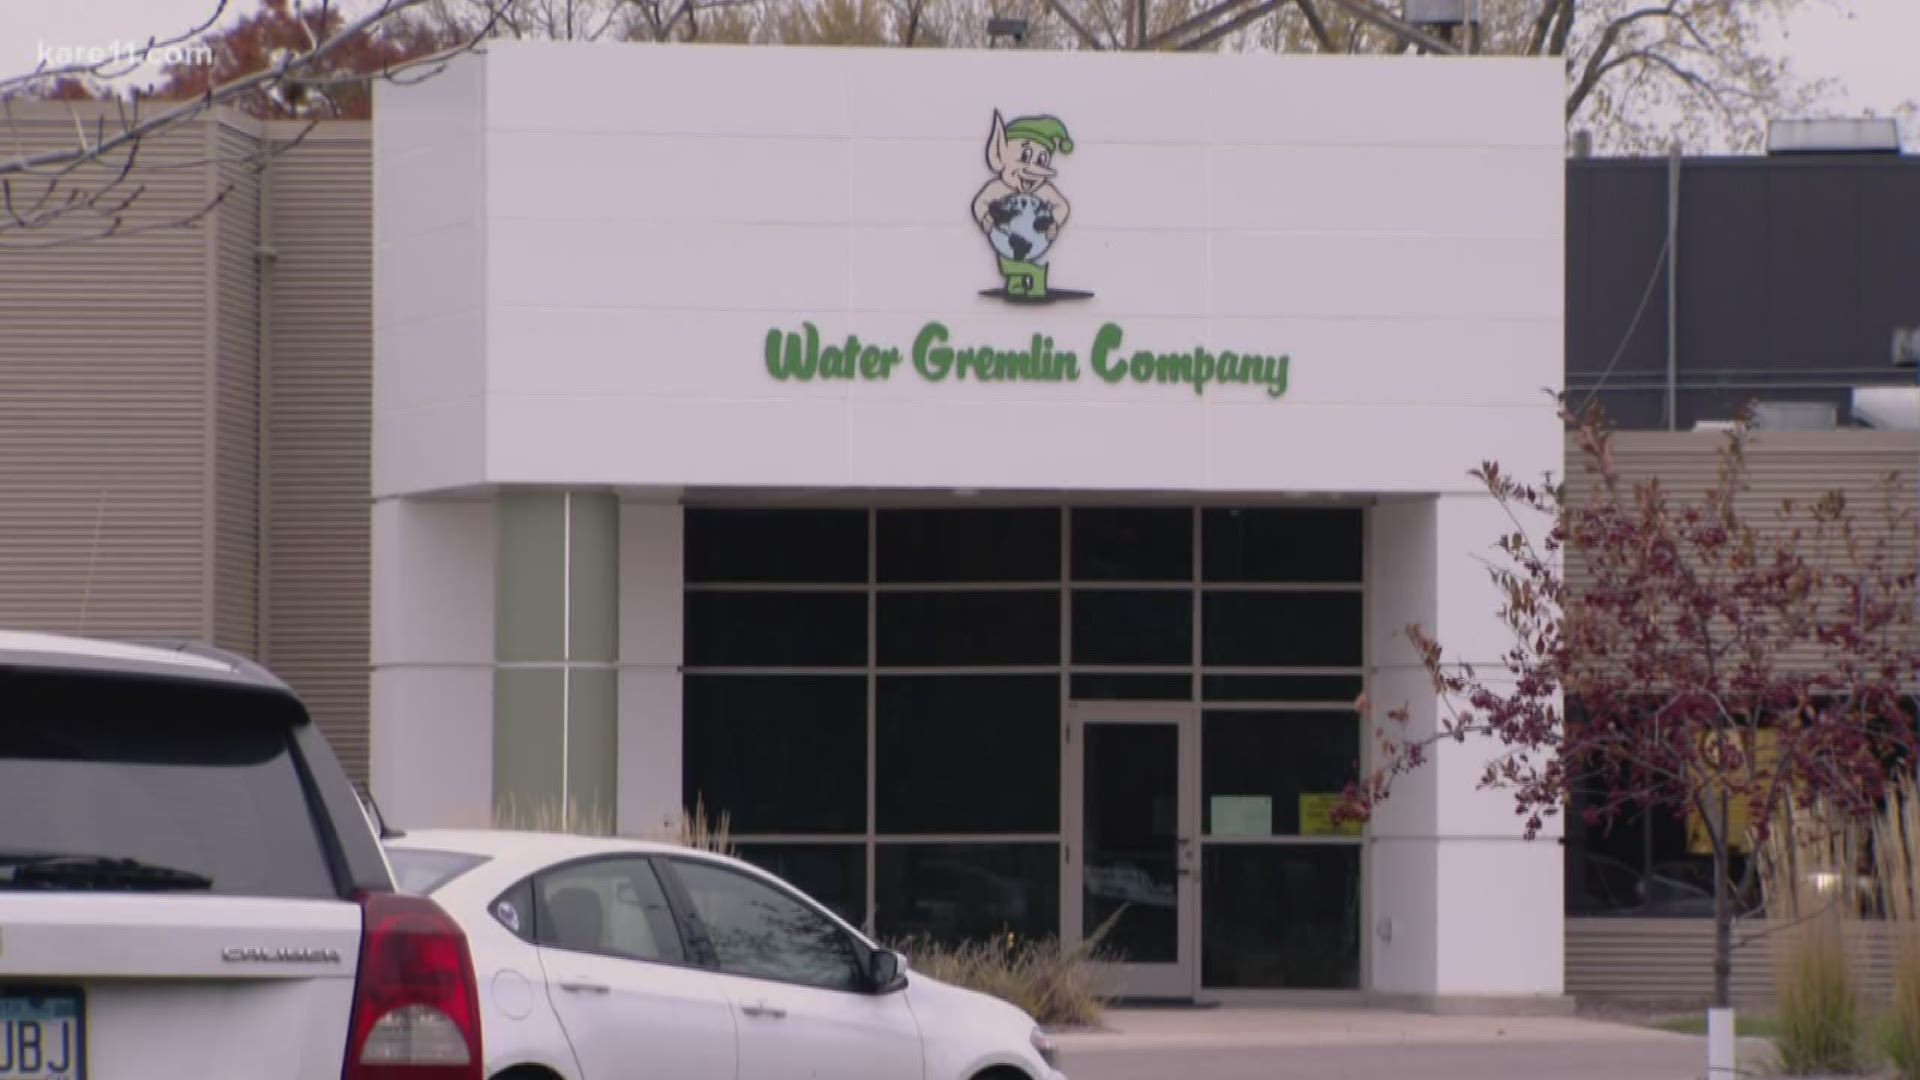 An injunction was filed after health investigators found at least 12 children of workers at Water Gremlin had elevated blood lead levels.